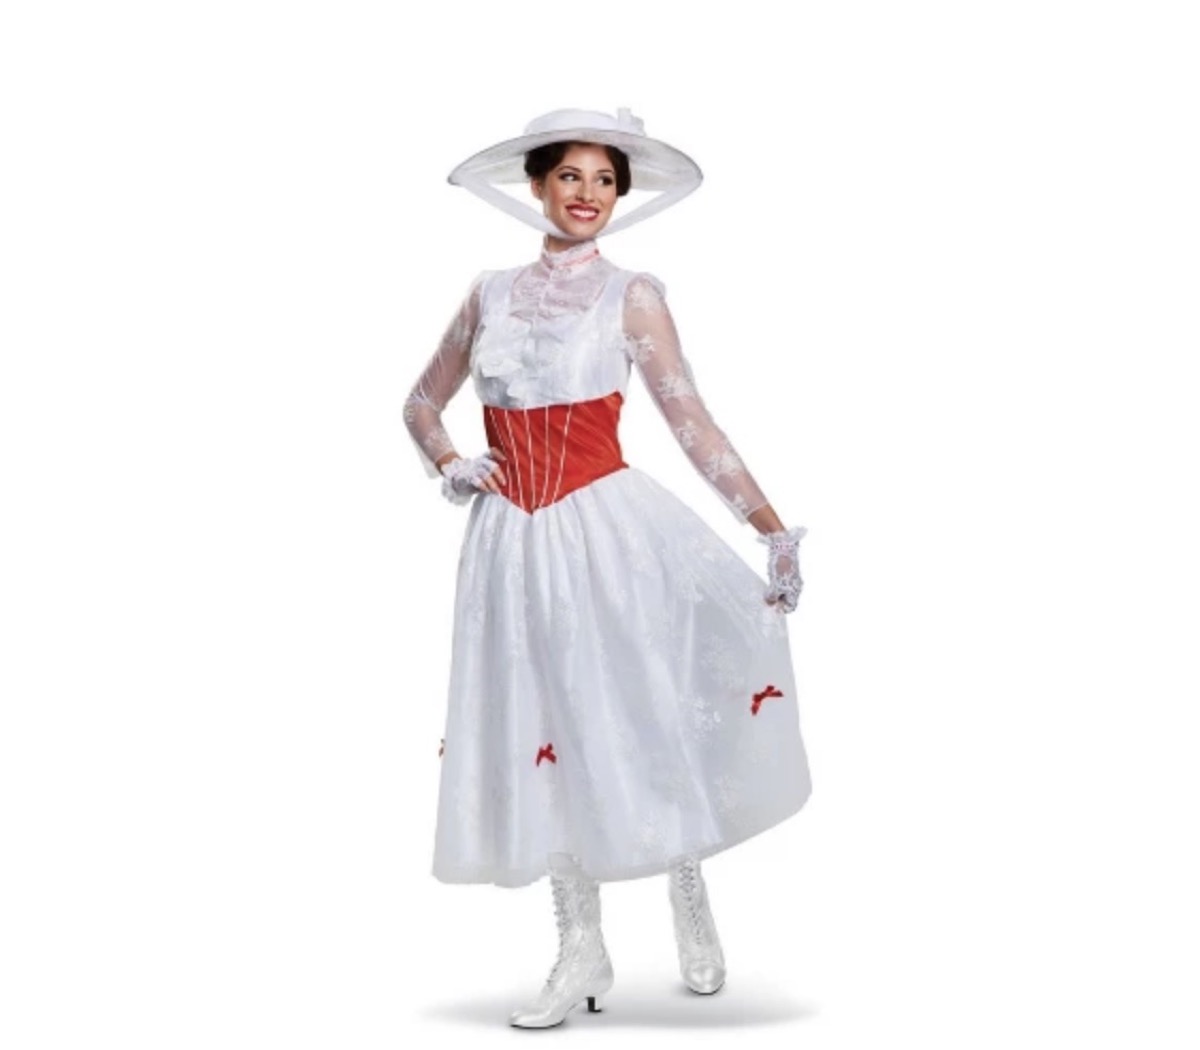 marry poppins costume, target halloween costumes